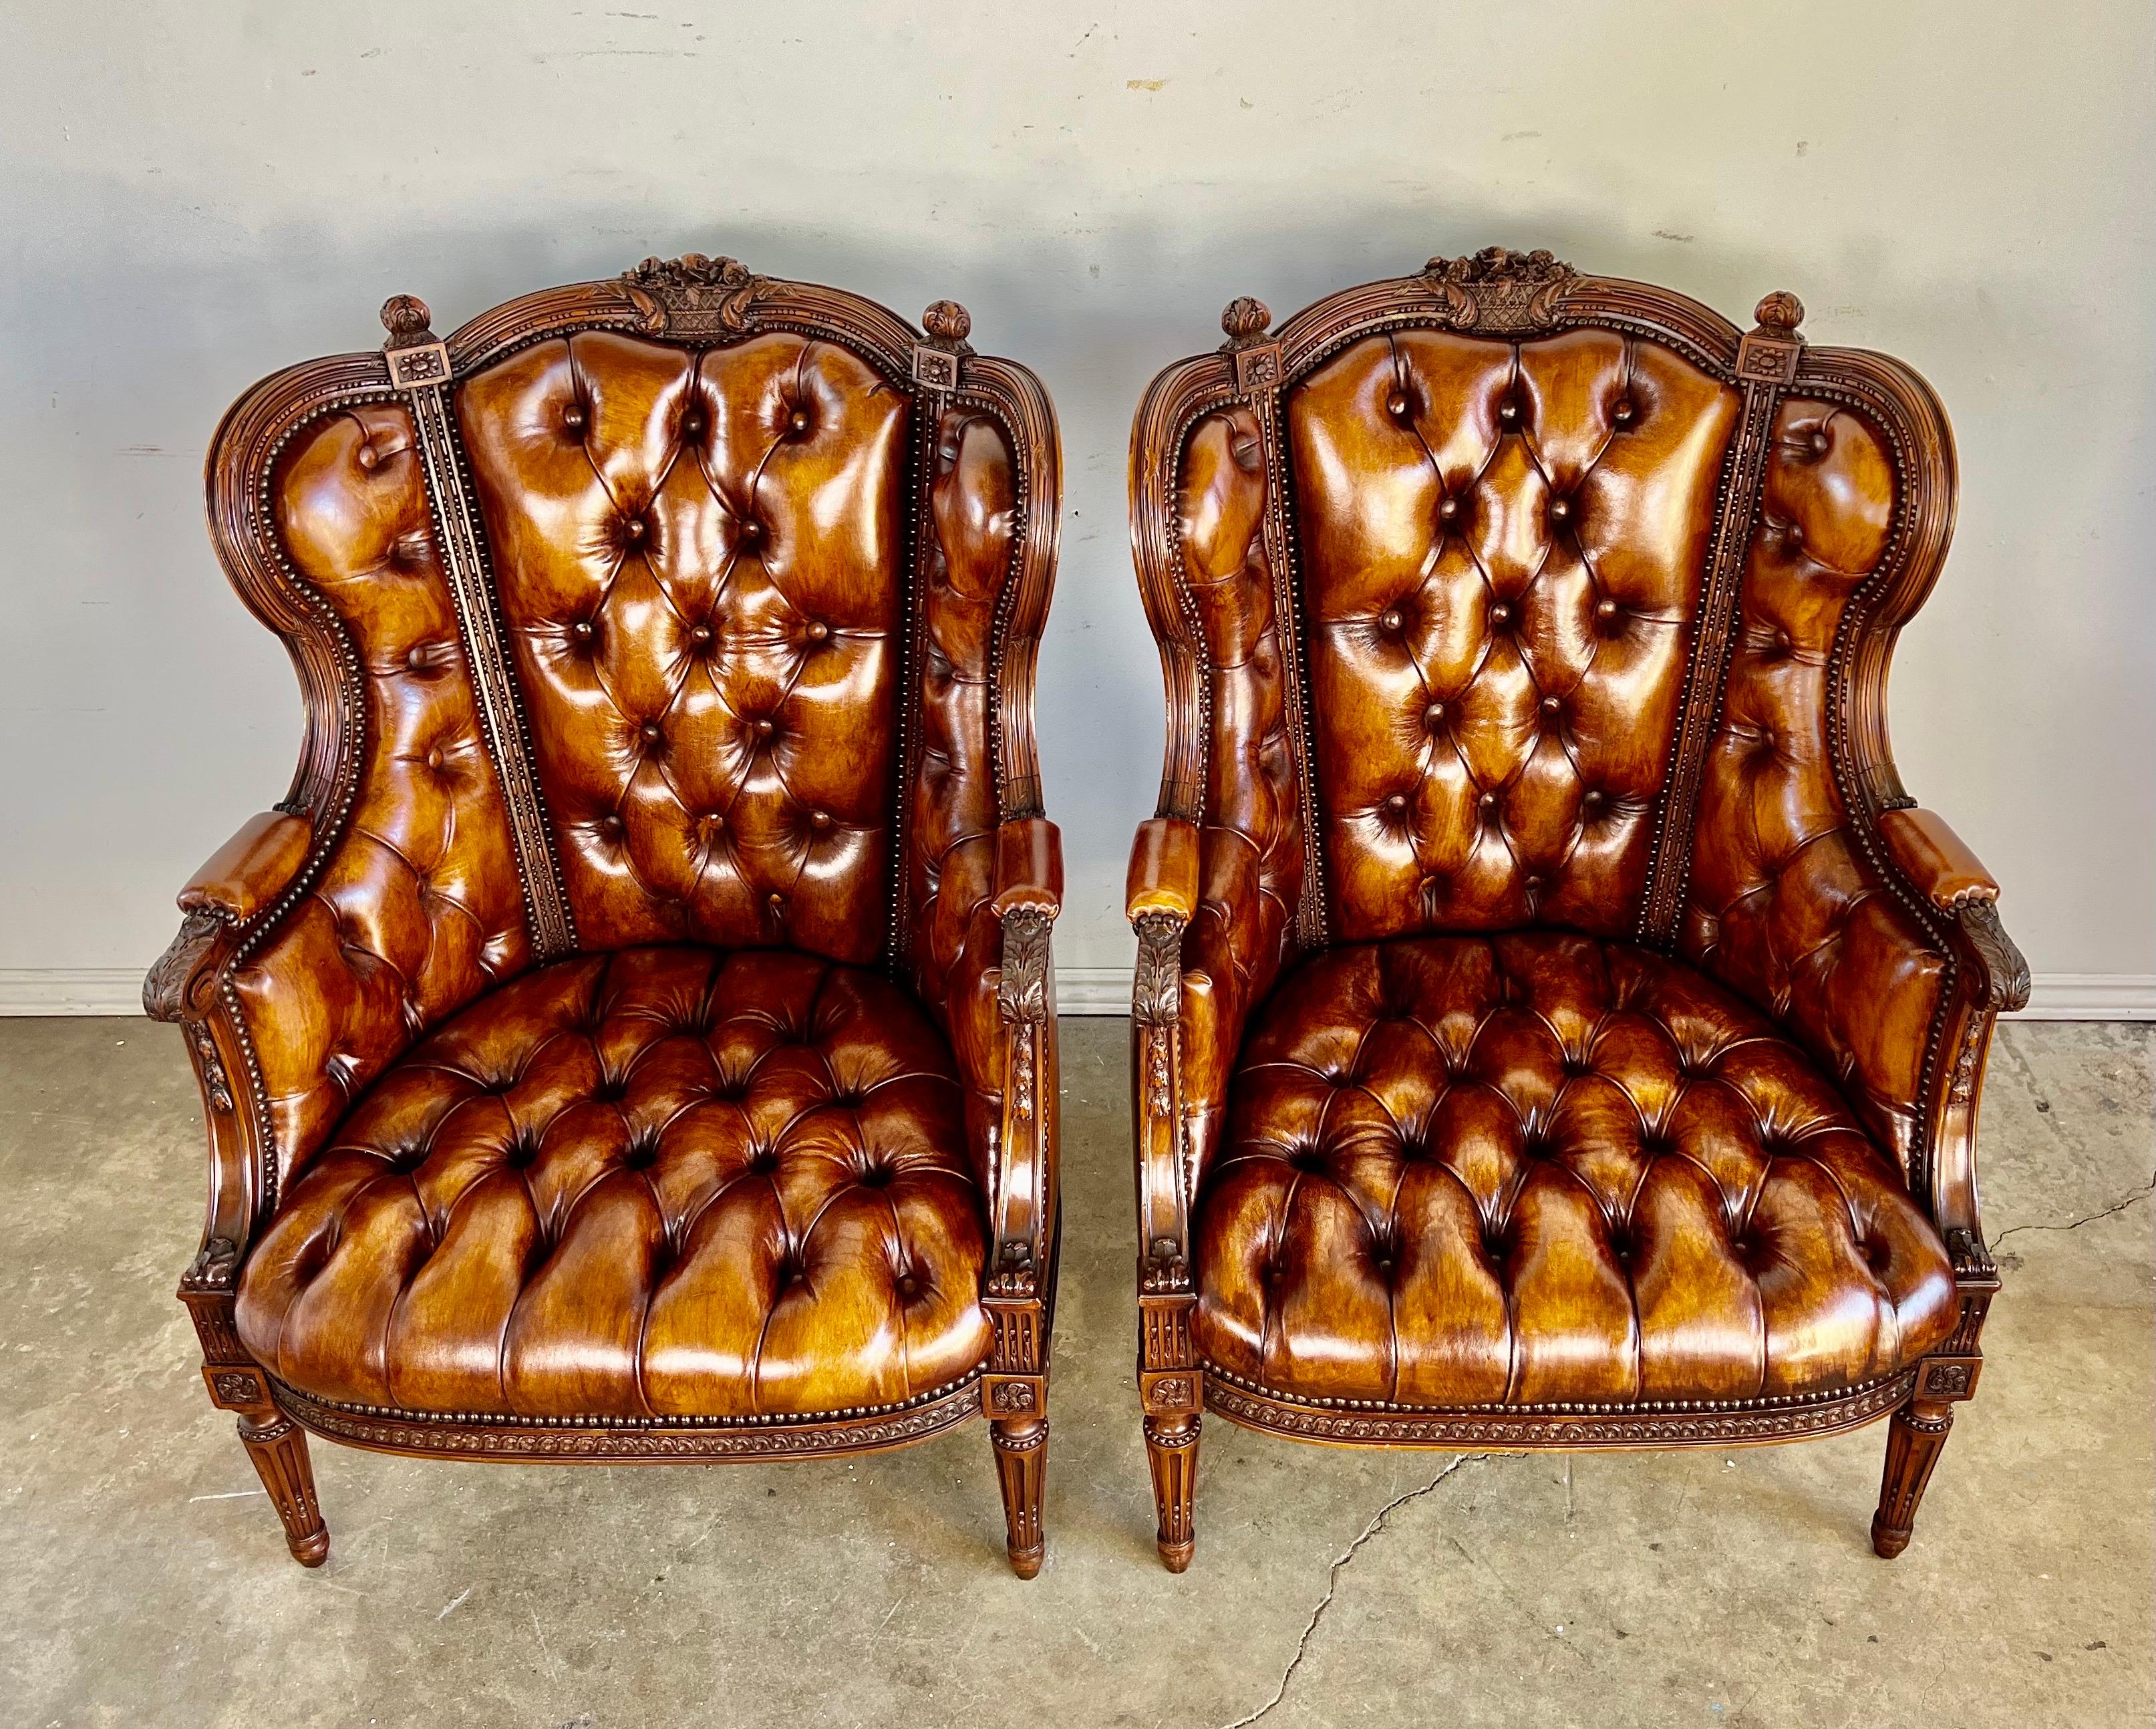 Pair of early 20th century wingback French leather tufted armchairs. The chairs stand on four straight fluted legs. They are upholster in tufted caramel colored leather with nailhead trim detail. These armchairs were finely carved with beautiful